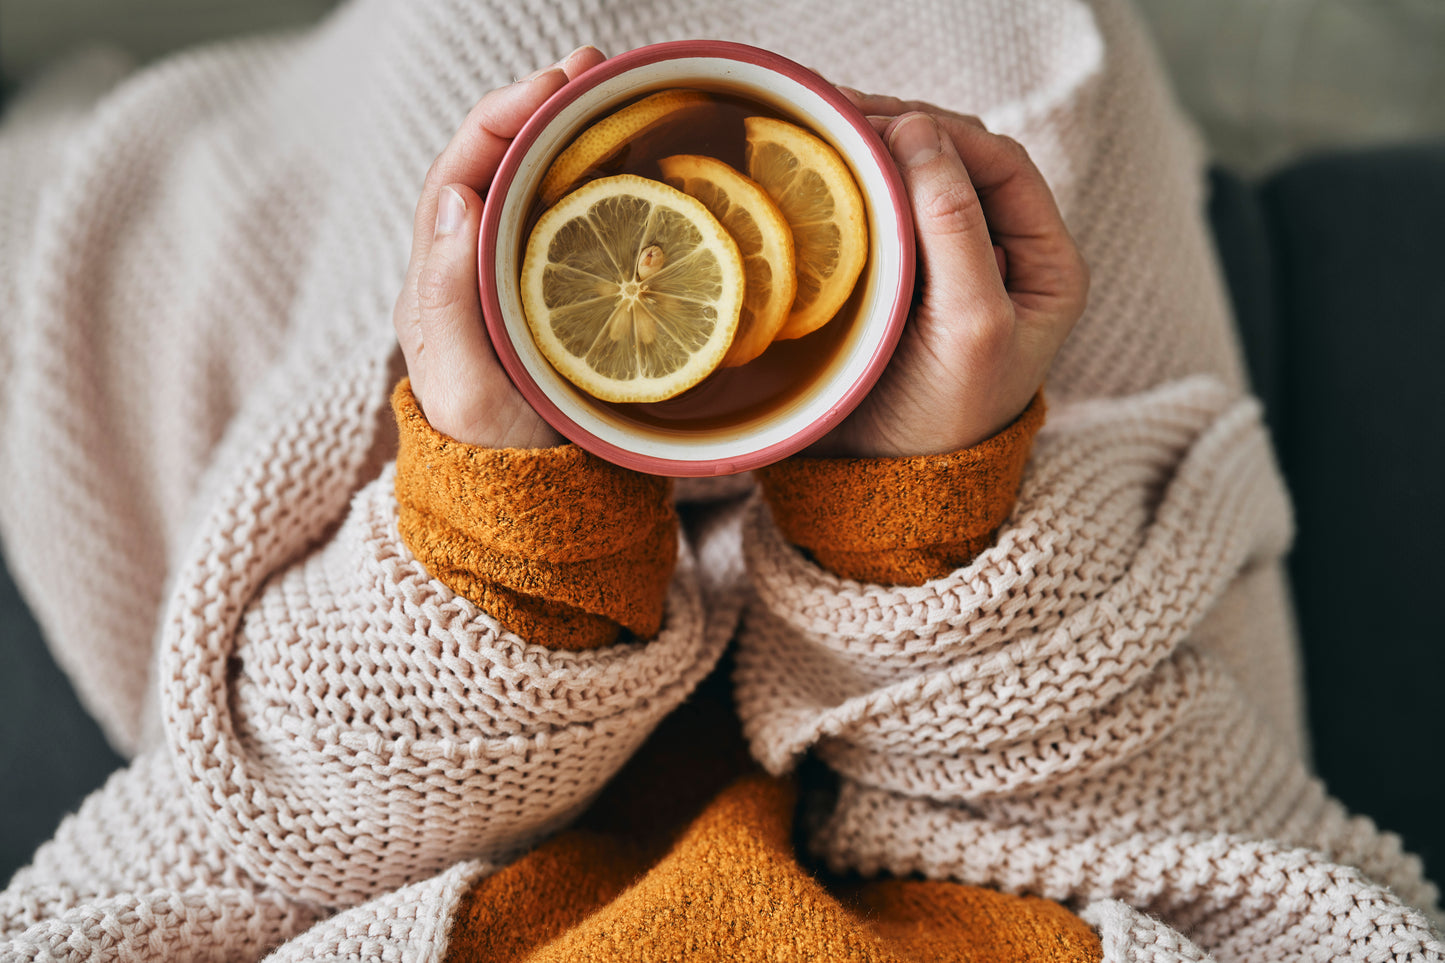 Constantly Sick? 4 Ways To Boost Your Immune System